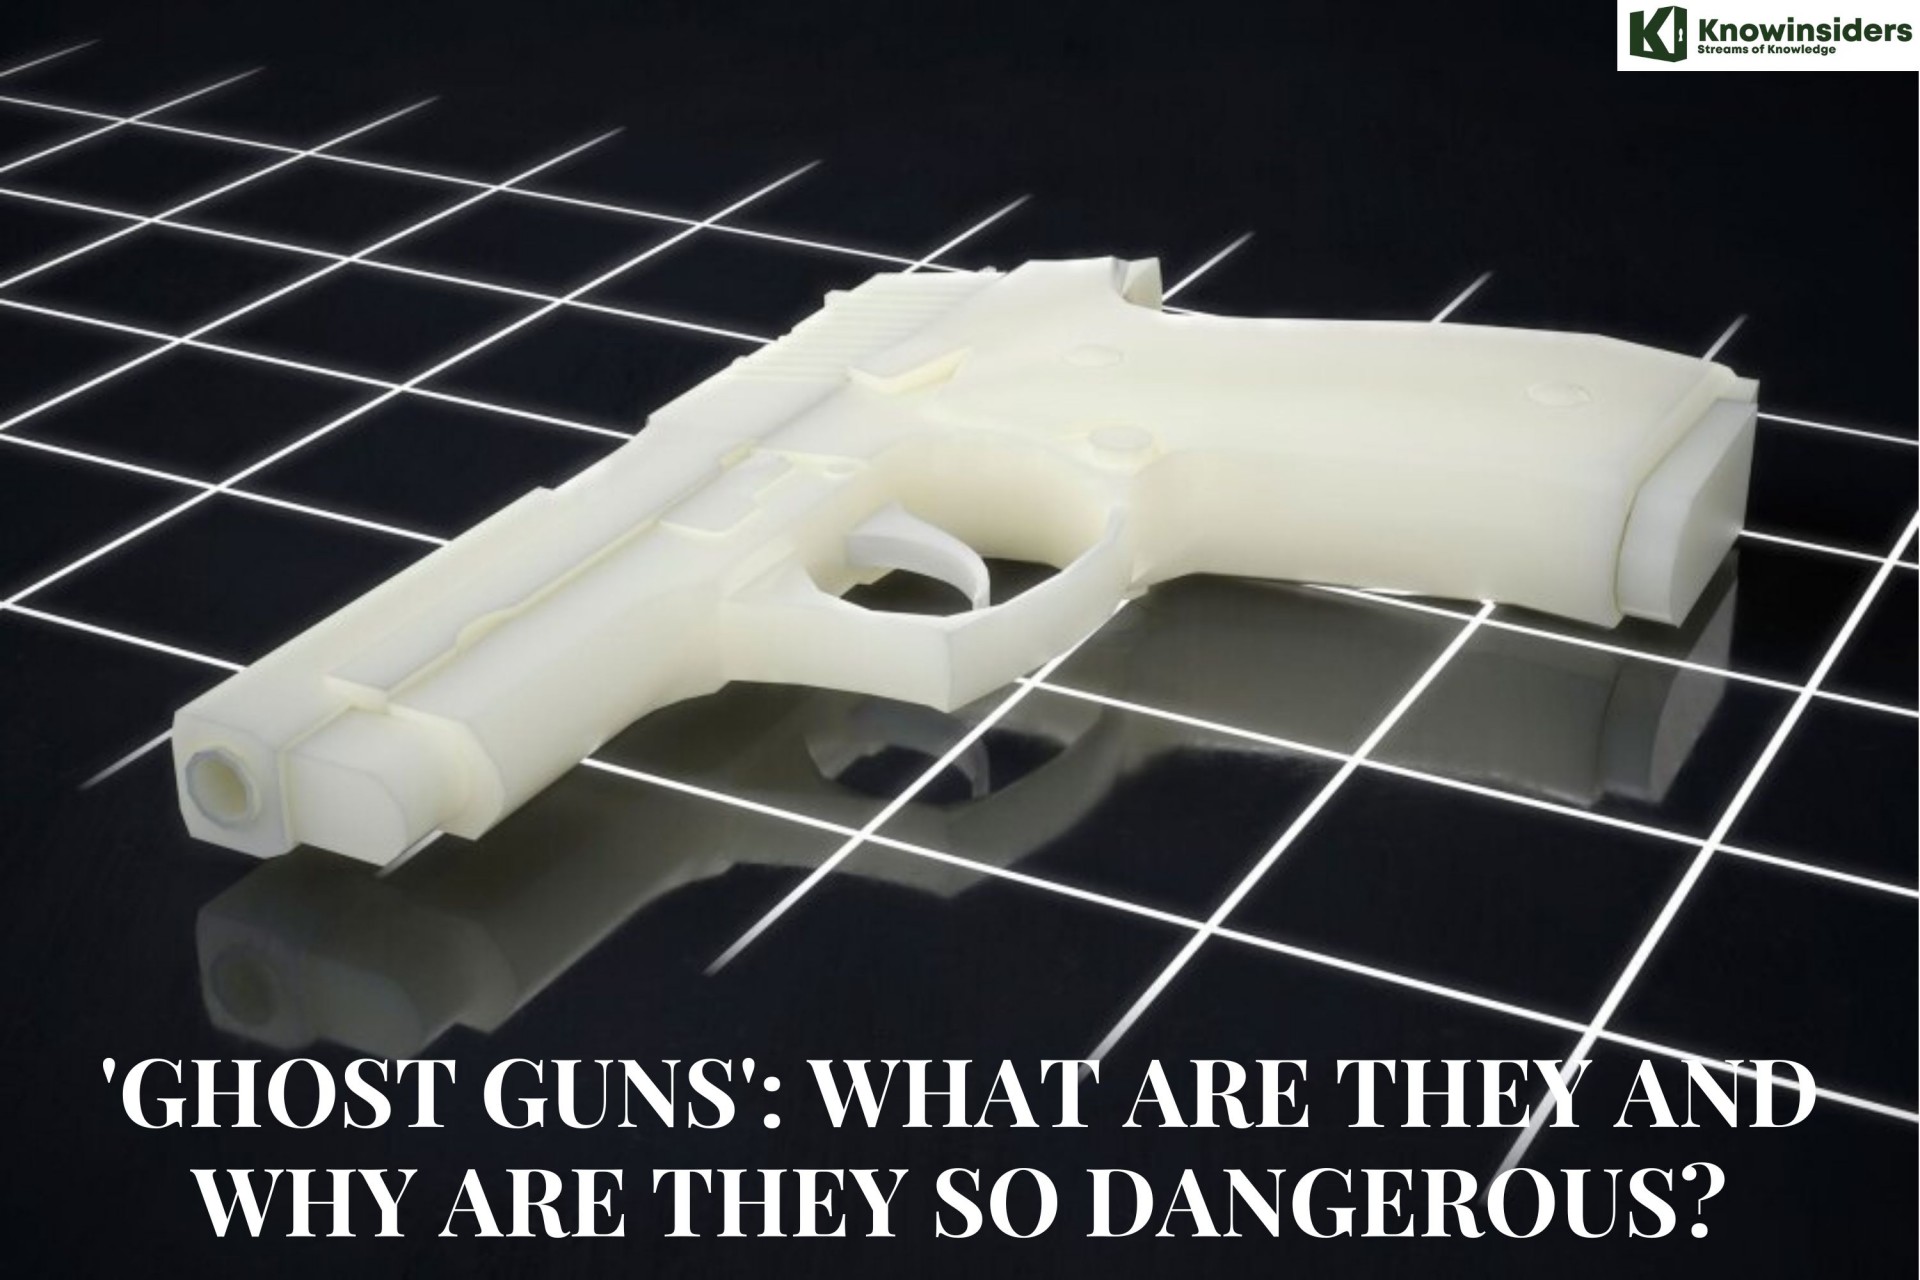 What are 'Ghost Guns and Why Are They So Dangerous?